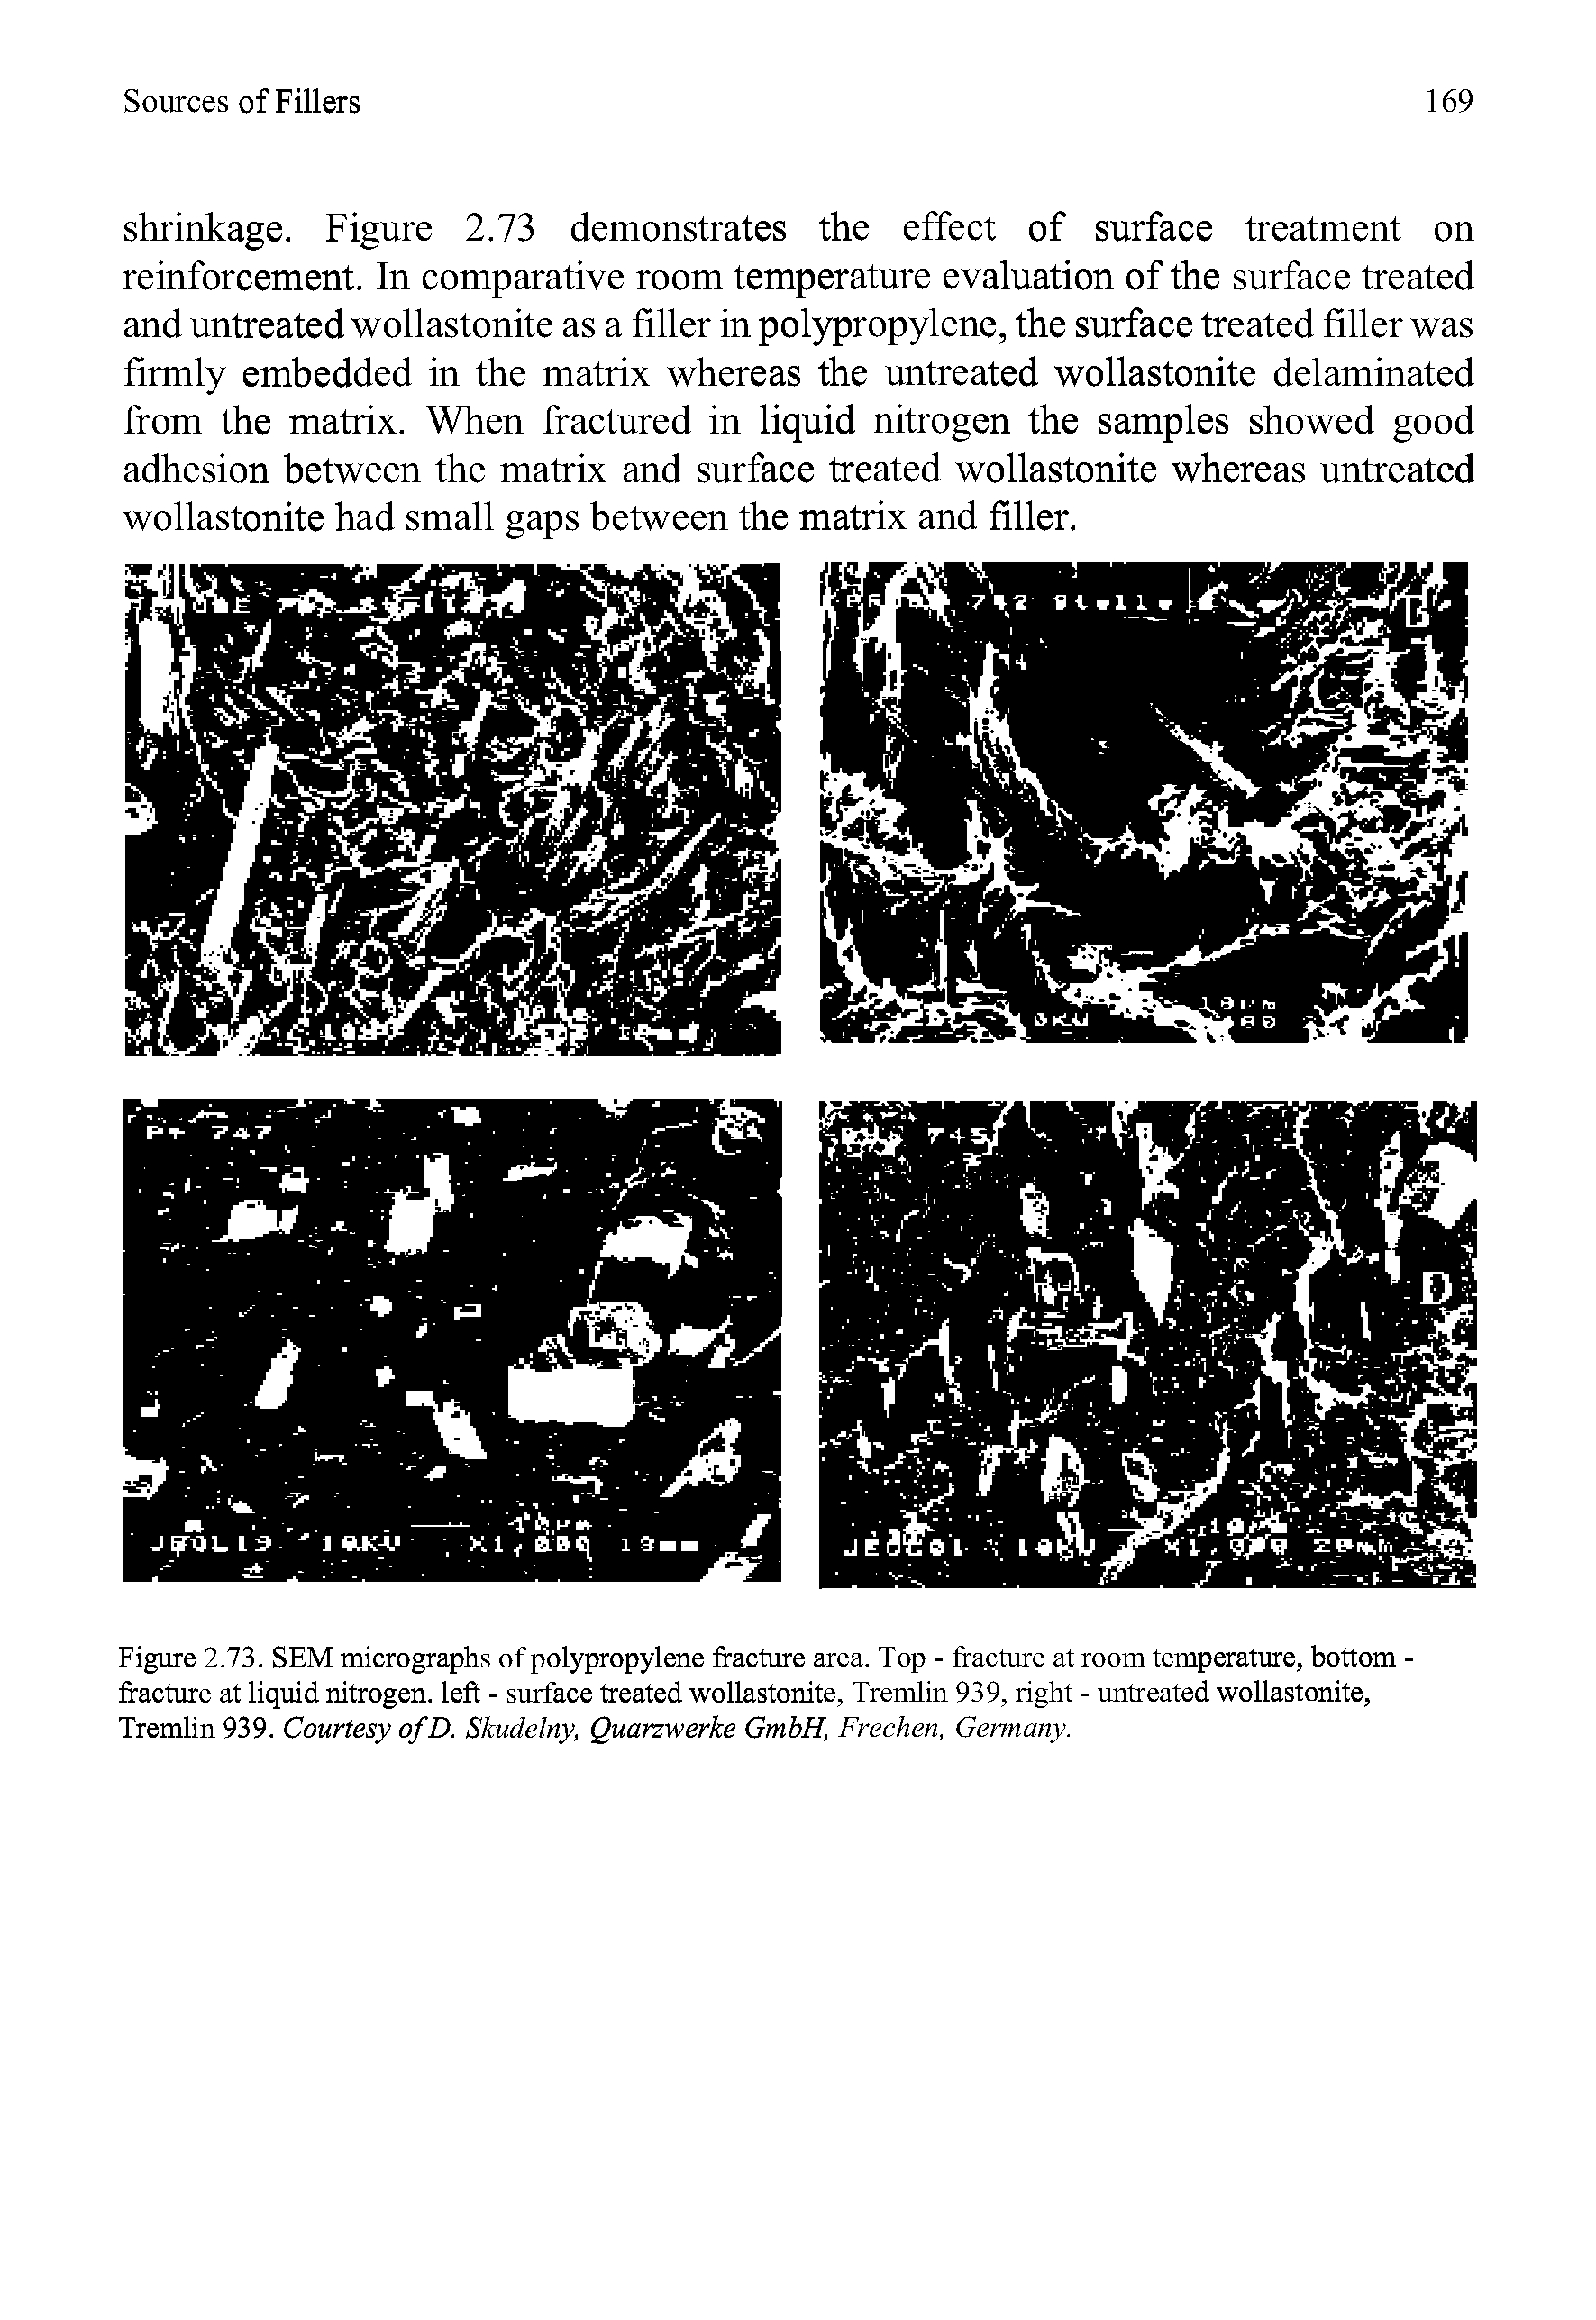 Figure 2.73. SEM micrographs of polypropylene fracture area. Top - fracture at room temperature, bottom -fracture at liquid nitrogen, left - surface treated wollastonite, Tremlin 939, right - untreated wollastonite, Tremlin939. Courtesy of D. Skudelny, Quarzwerke GmbH, Frechen, Germany.